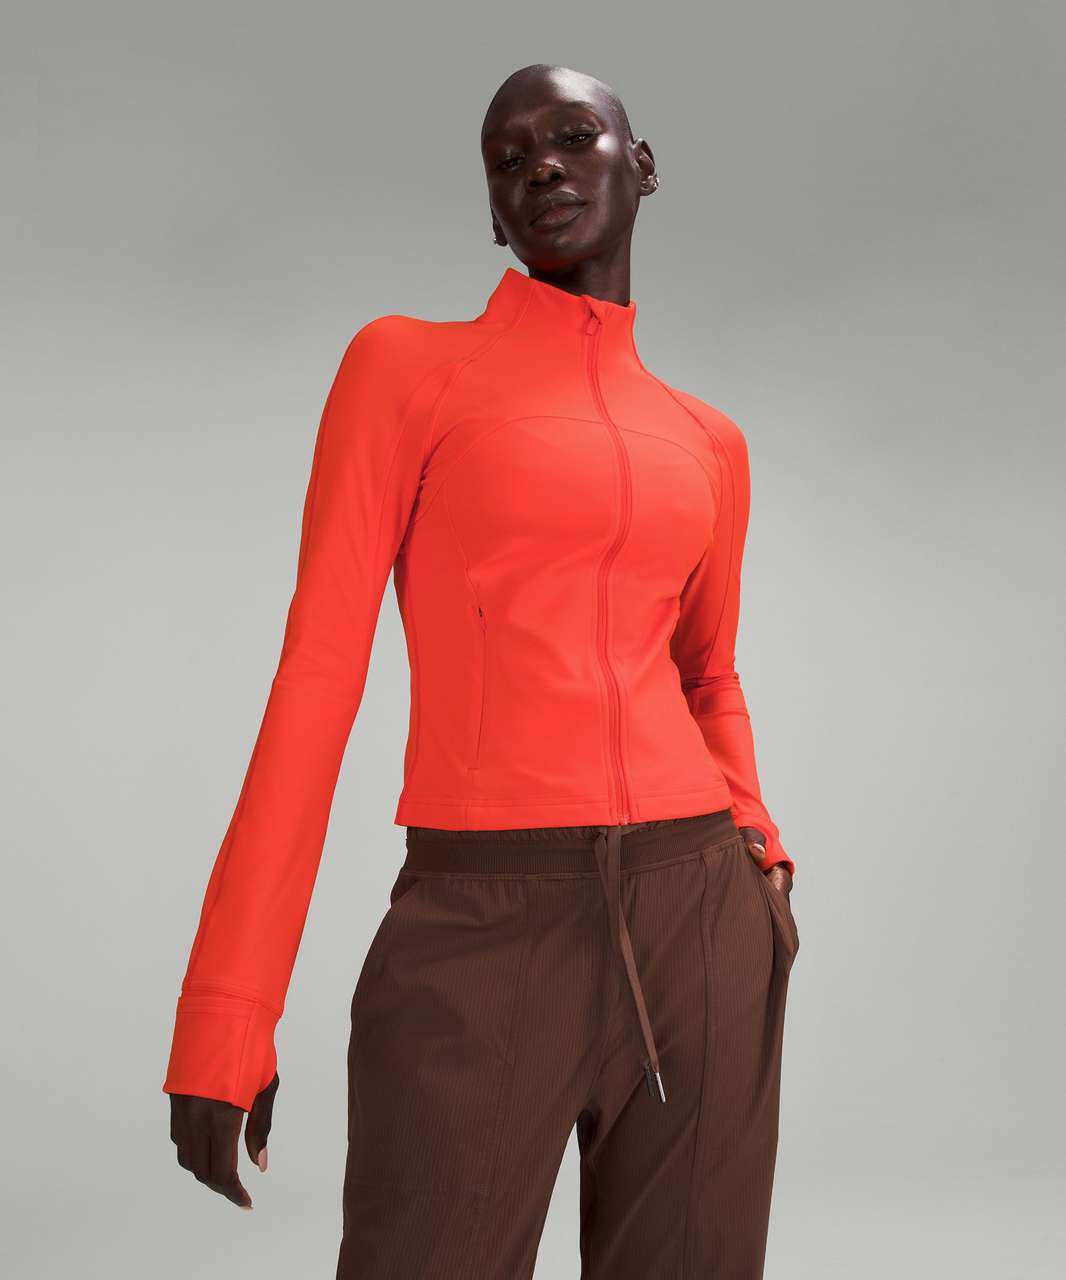 Replying to @macyloowho this color is everything to me 💥💥💥💥 #lulul, solar orange lululemon